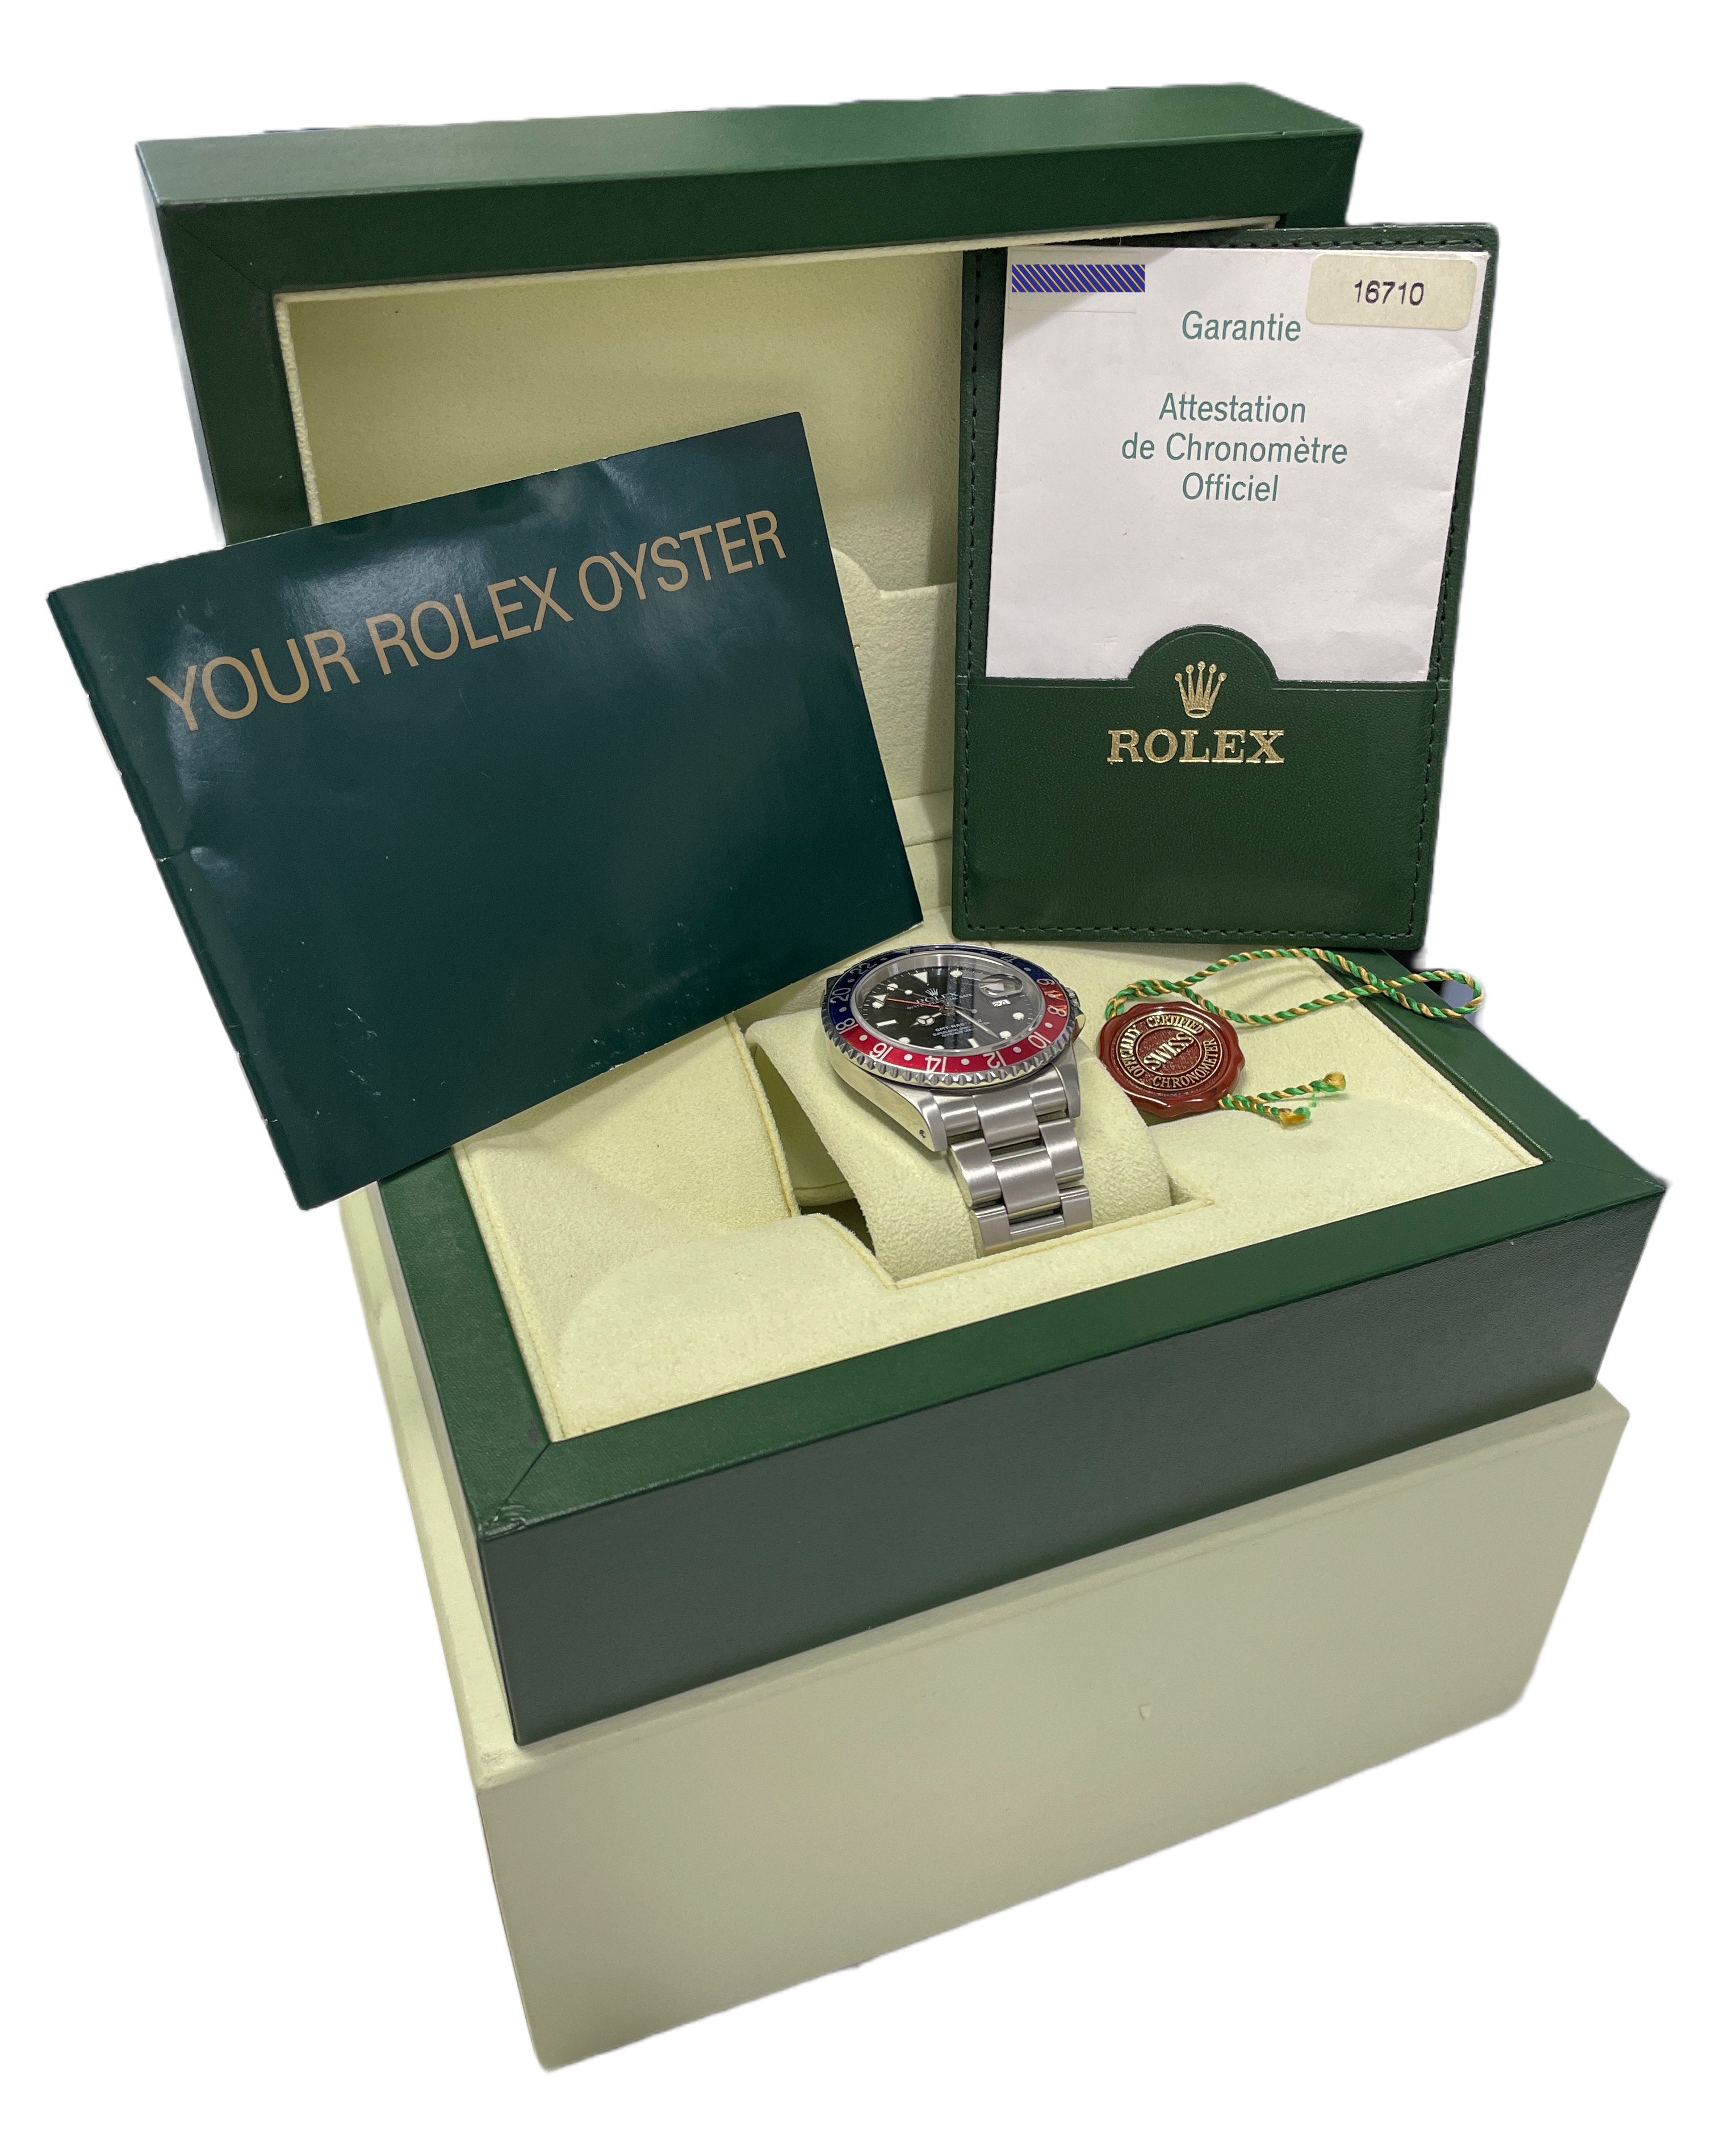 PAPERS Rolex GMT-Master II PEPSI Blue Red Stainless Steel 40mm 16710 Watch BOX